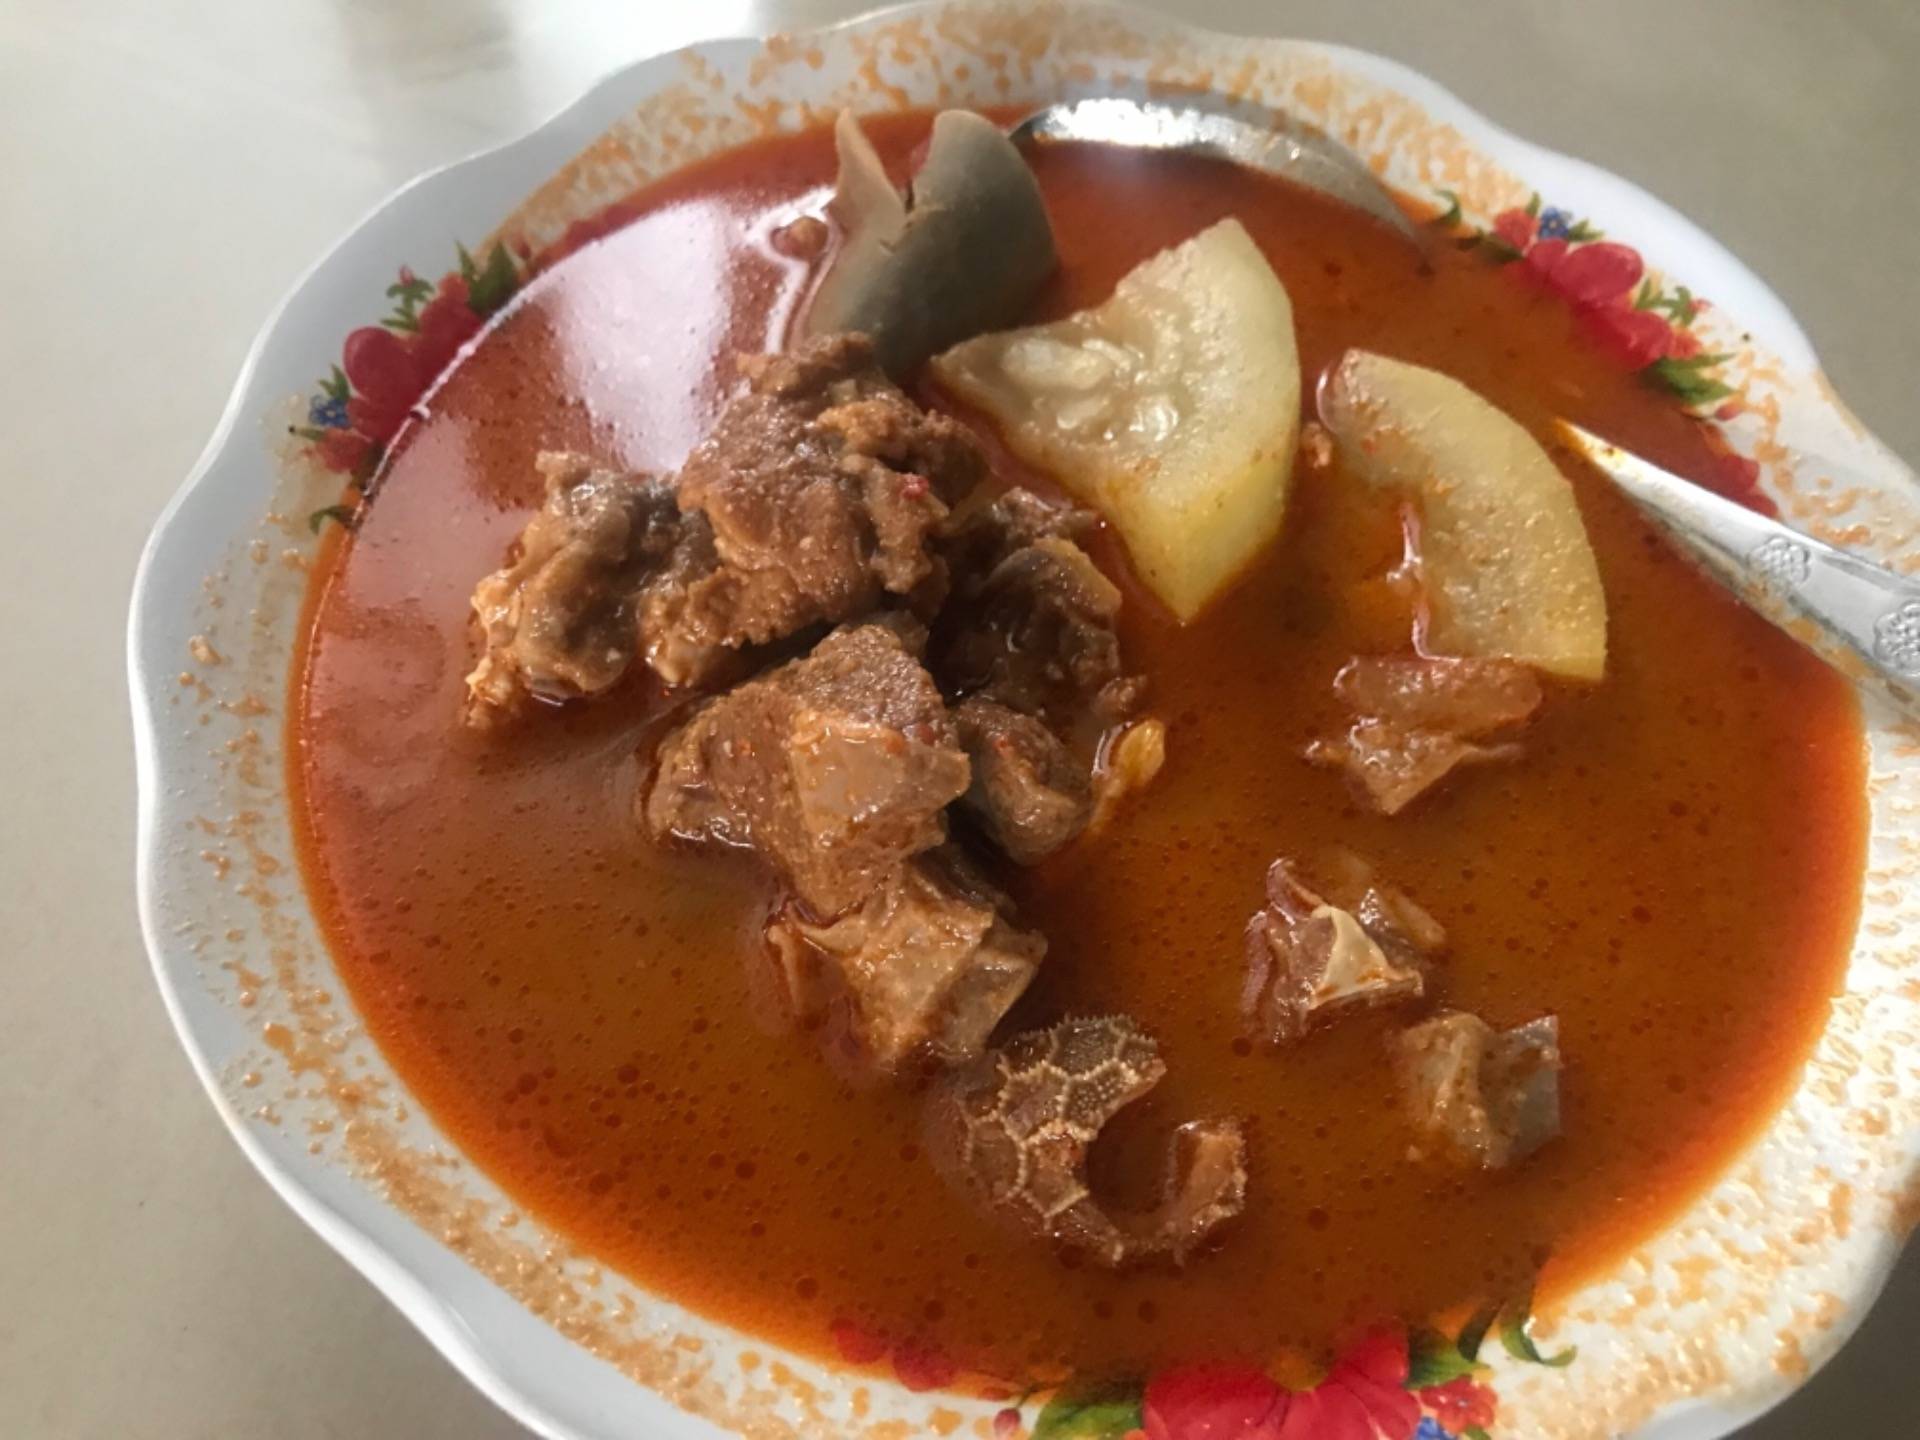 The Curry Goat in Jeunib